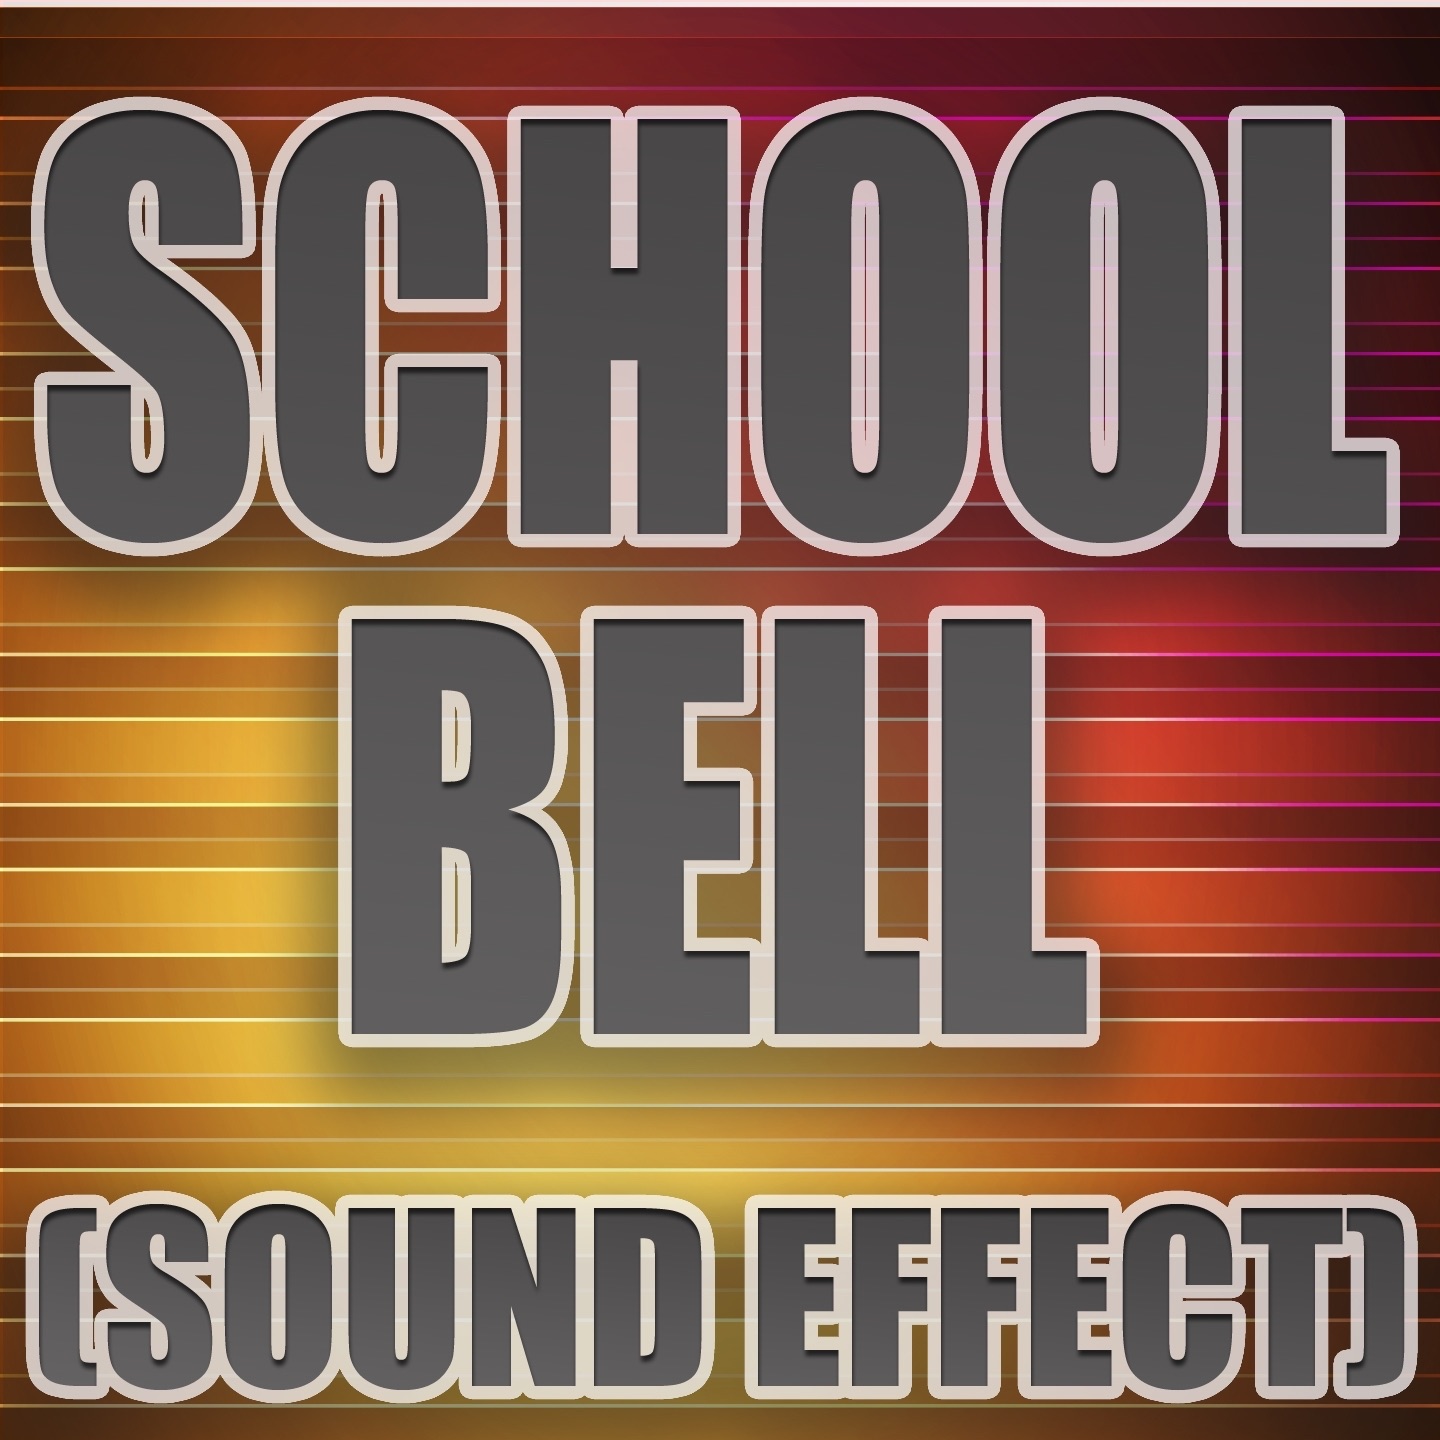 soft wind sound effects mp3 download